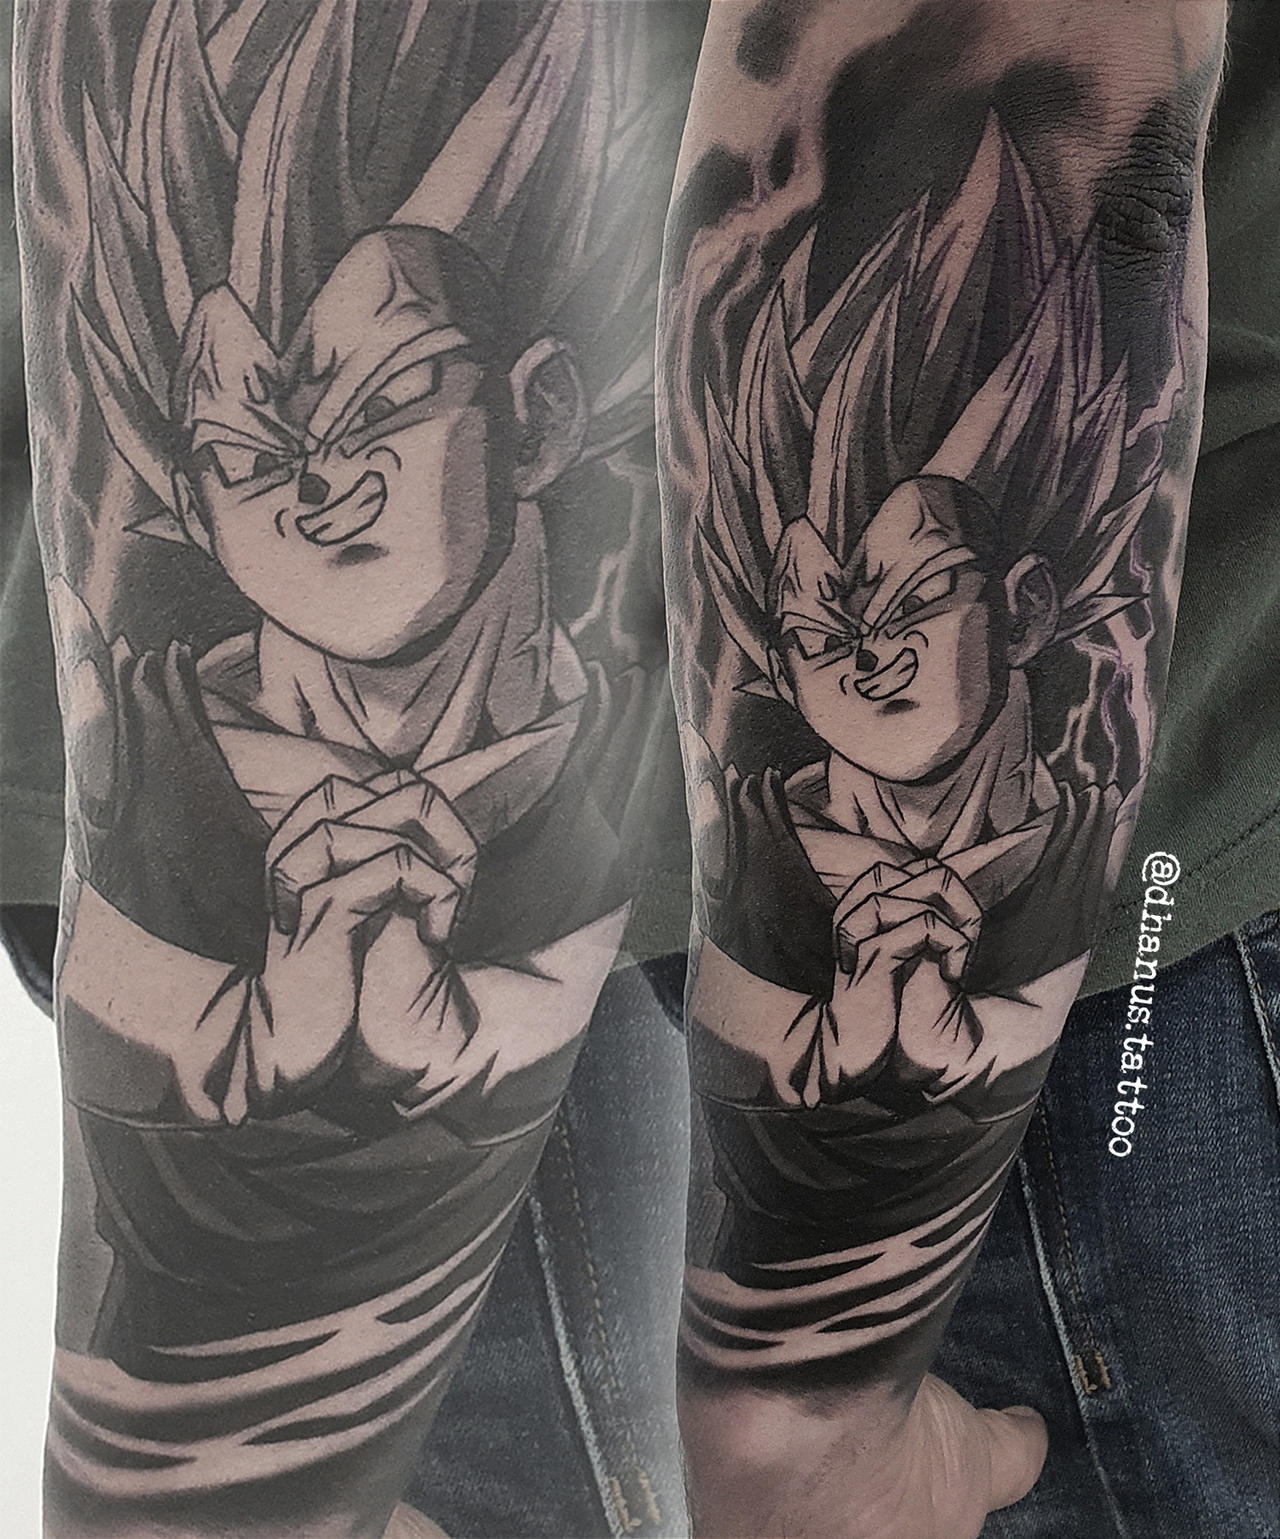 Vegeta from Dragonball - tattoo by DaveVeroInk by DaveVeroInk on DeviantArt